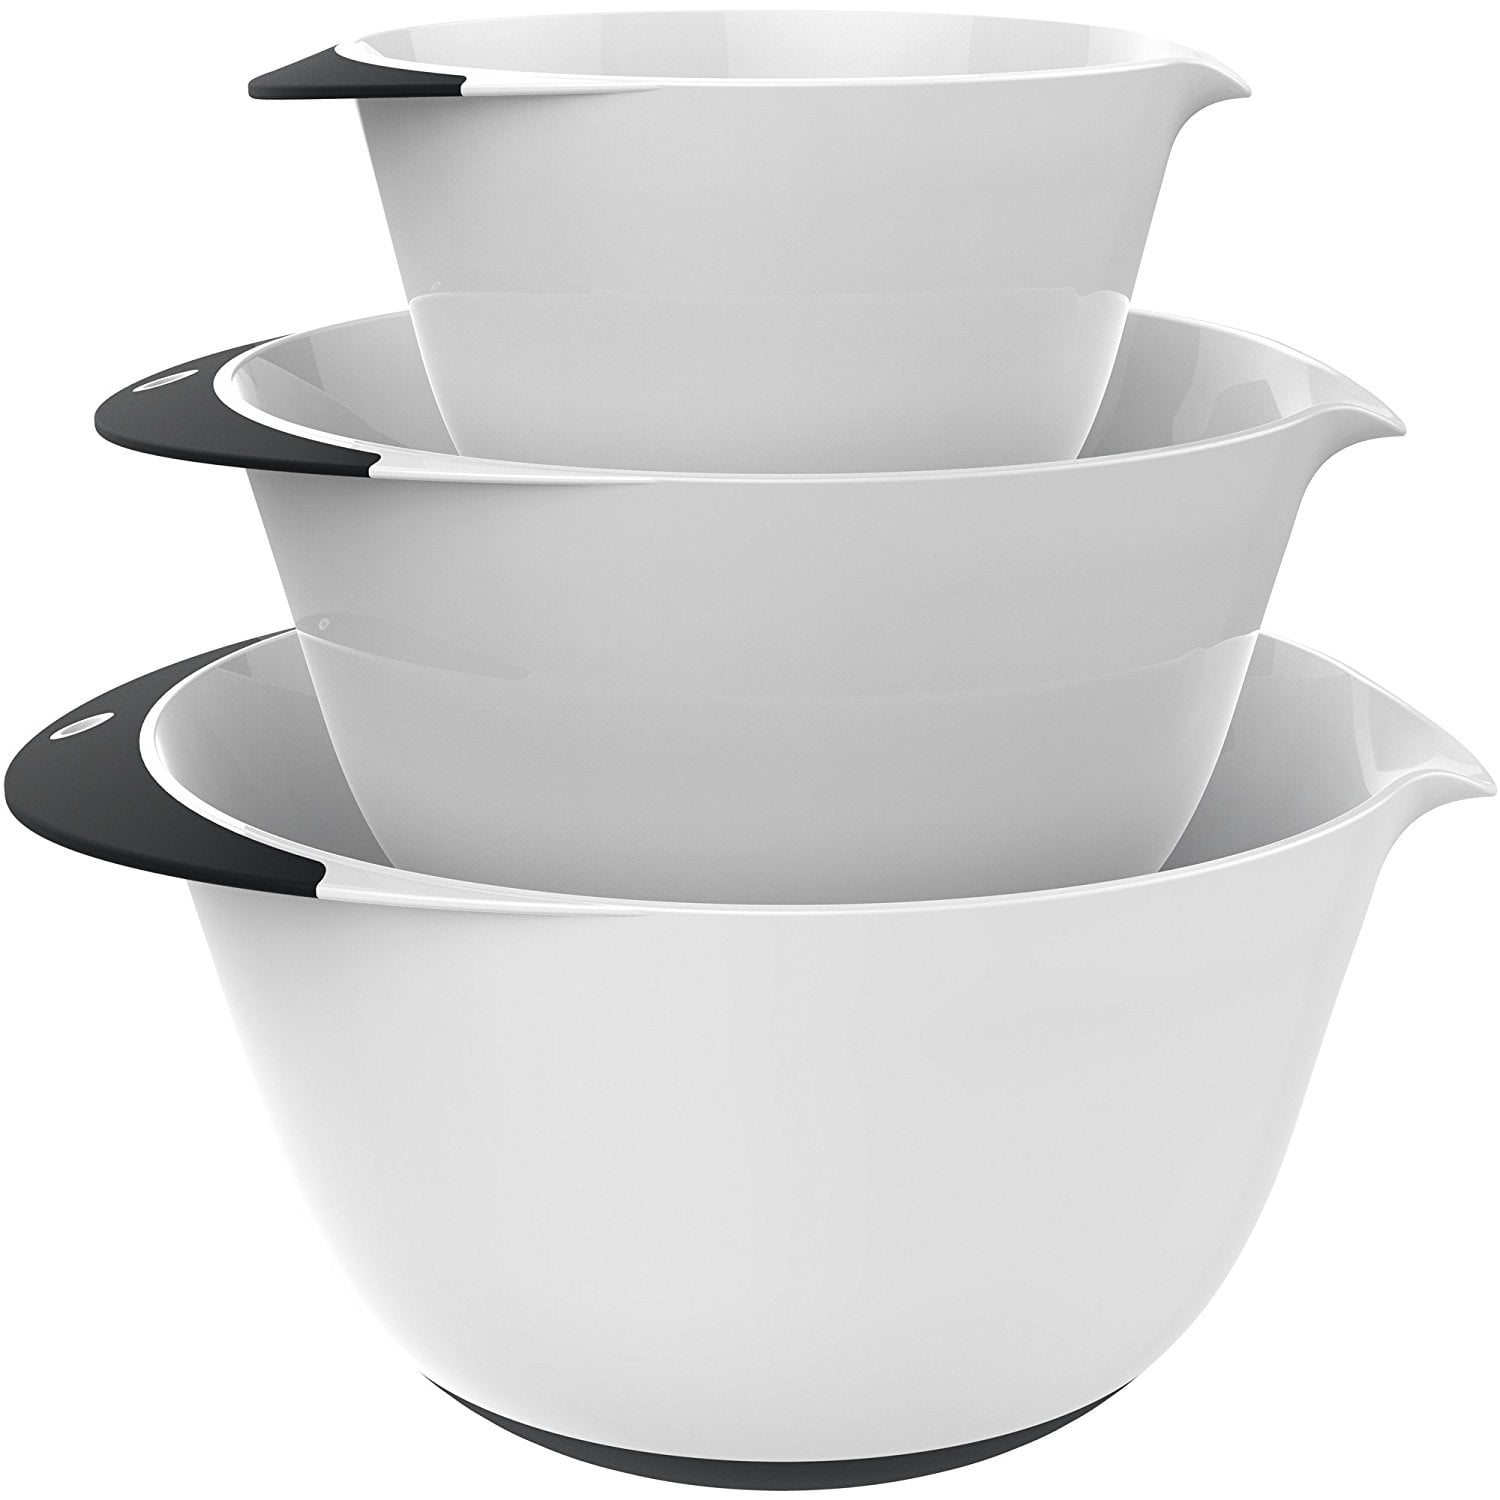 1.5L/3L/5L Non Slip Silicone Bottom & Measuring Guide Marking Nesting Metal Bowl Set for Baking Cooking Preparing Salad Bowl 3 Piece Stainless Steel Mixing Bowl with Pouring Spout